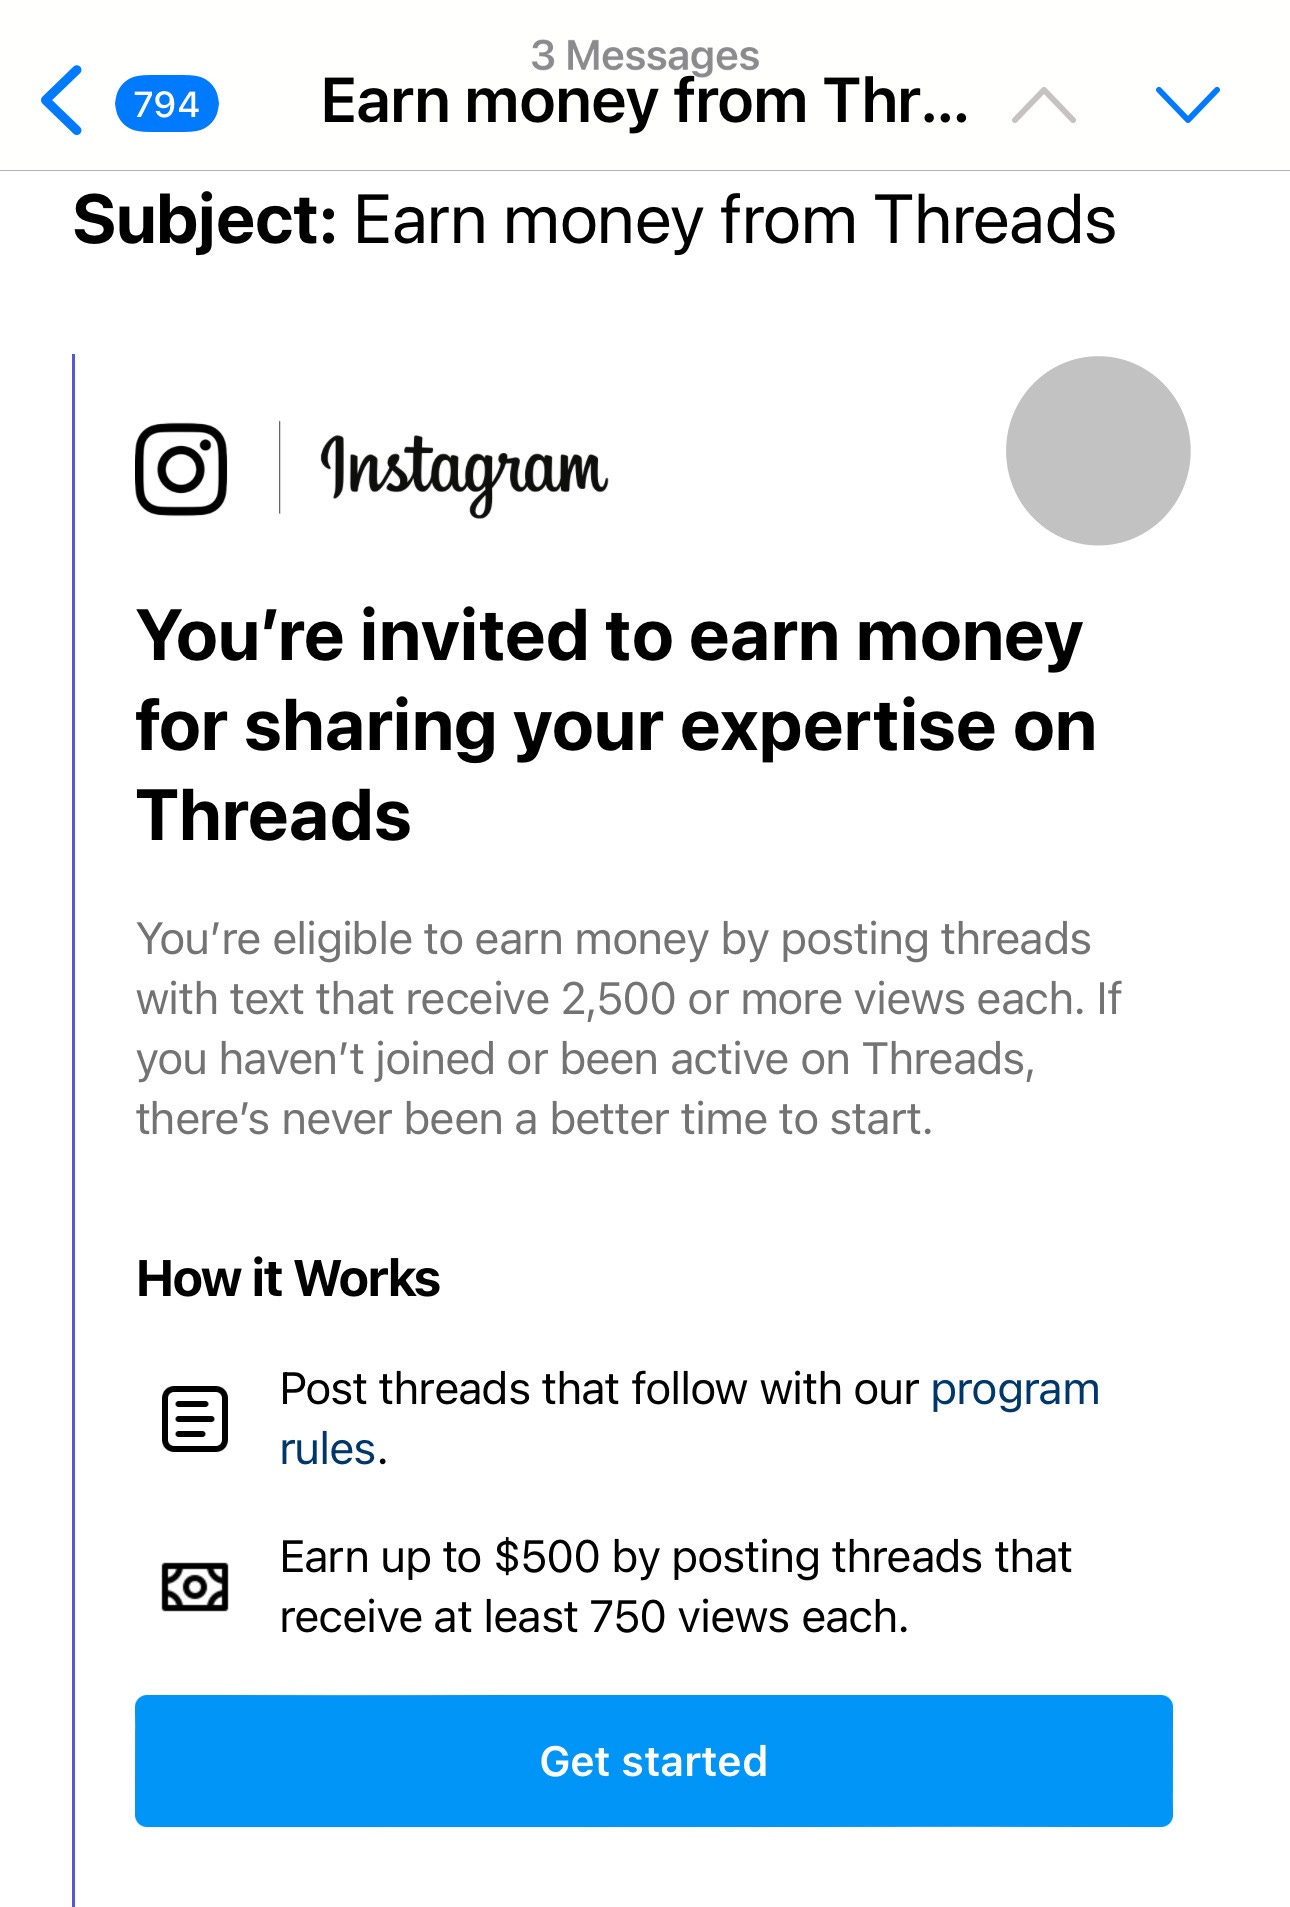 Email screenshot. Subject line: Earn money from Threads. Instagram logo. Text in email: “You’re invited to earn money for sharing your expertise on Threads. You’re eligible to earn money by posting threads with text that receive 2,500 or more views each. If you haven’t joined or been active on Threads, there’s never been a better time to start. How it works: Post threads that follow with our program rules. Earn up to $500 by posting threads that receive at least 750 views each.” Button at the bottom: Get Started